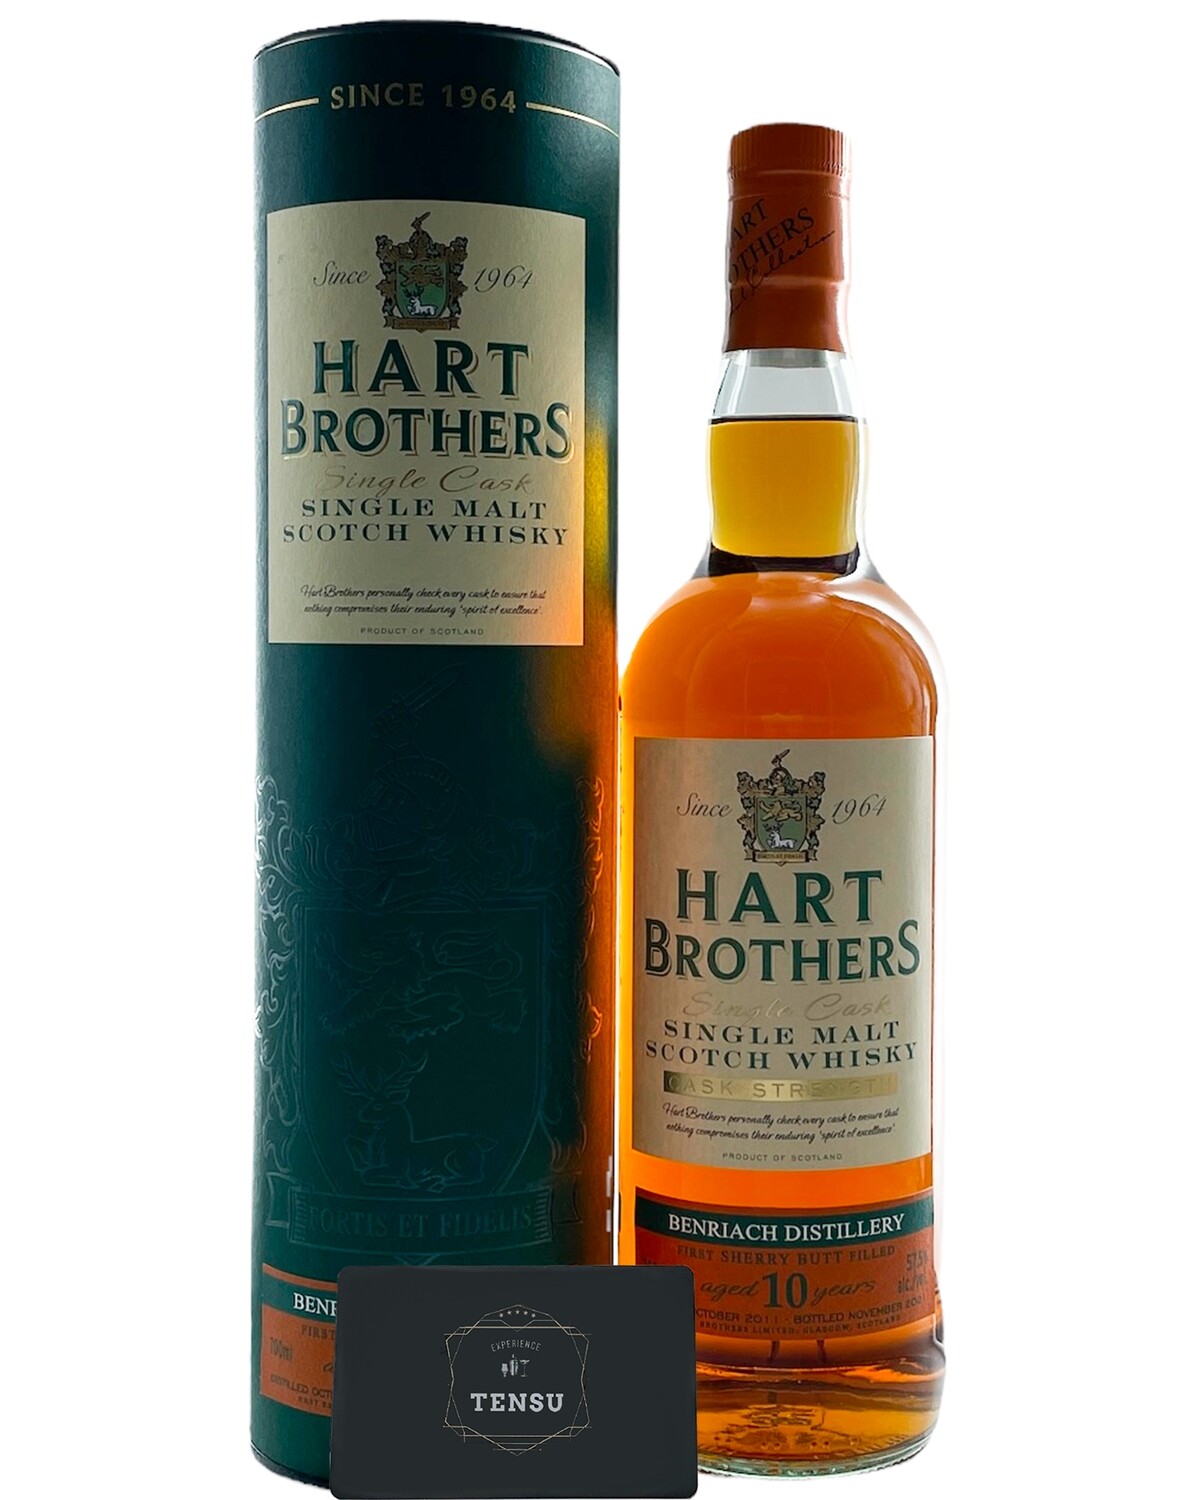 BenRiach 10Y (2011-2021) Sherry Butt 57.5 "Hart Brothers"